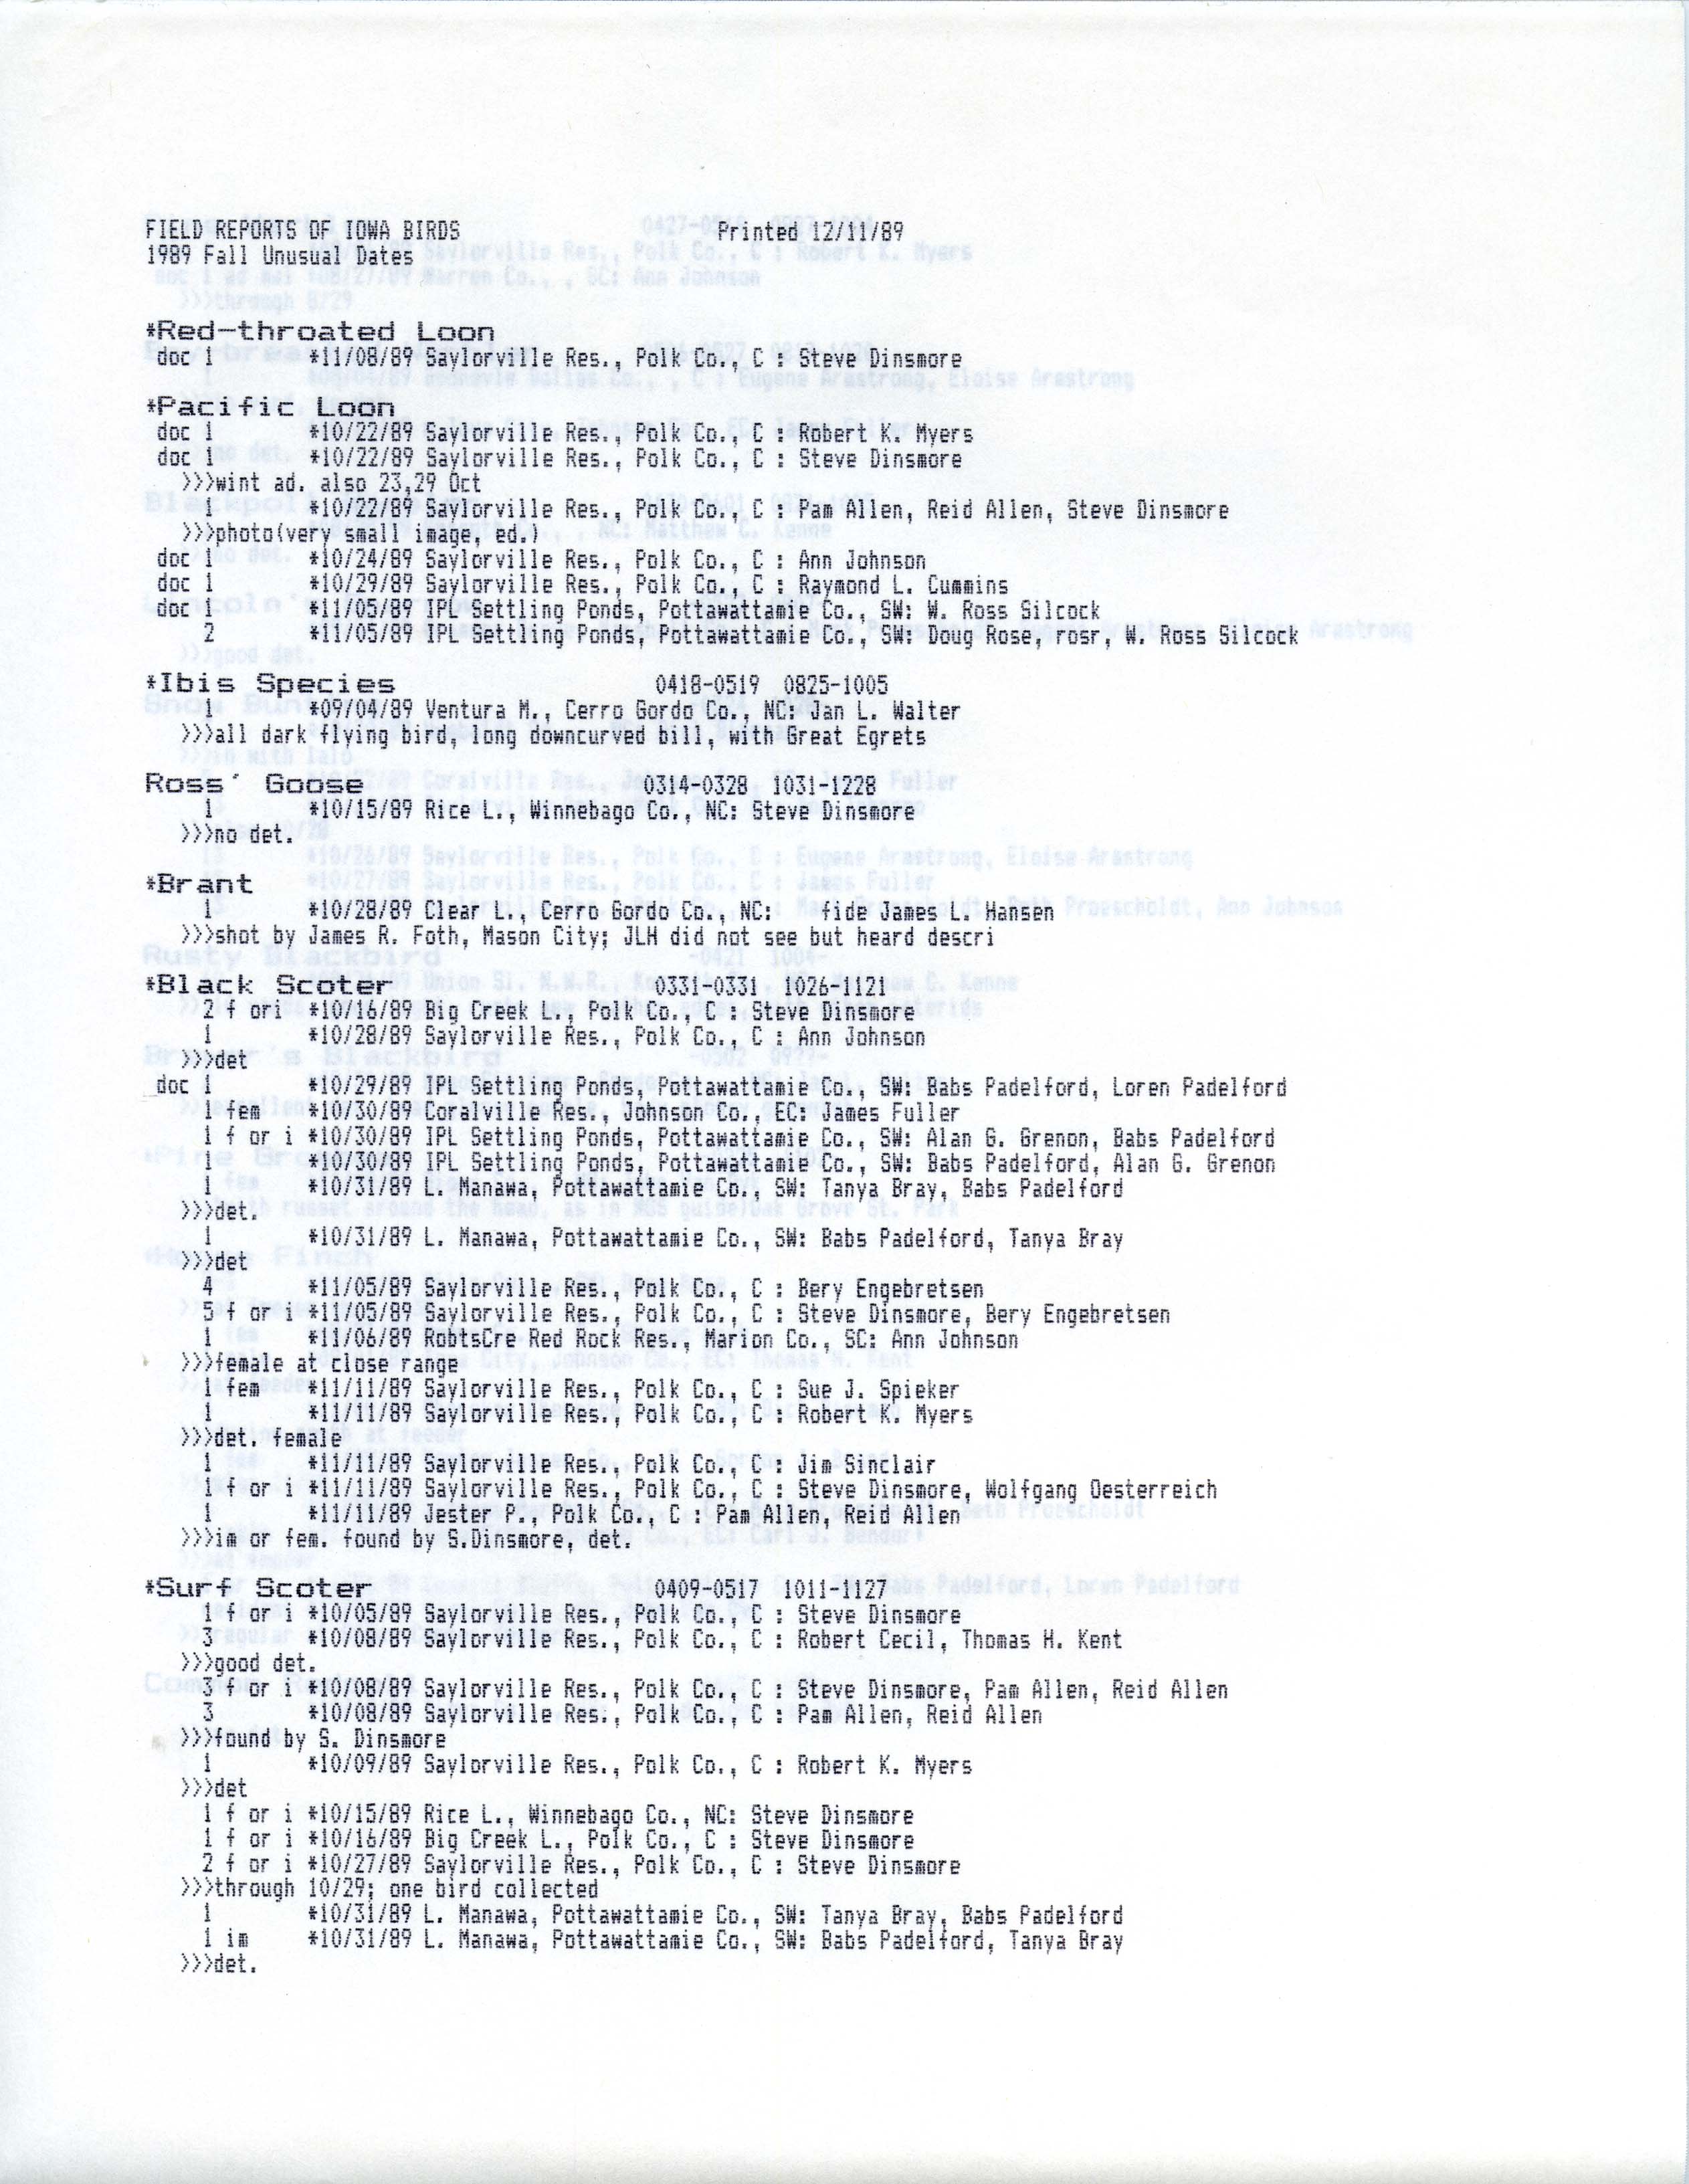 Field reports, unknown compiler, fall 1989